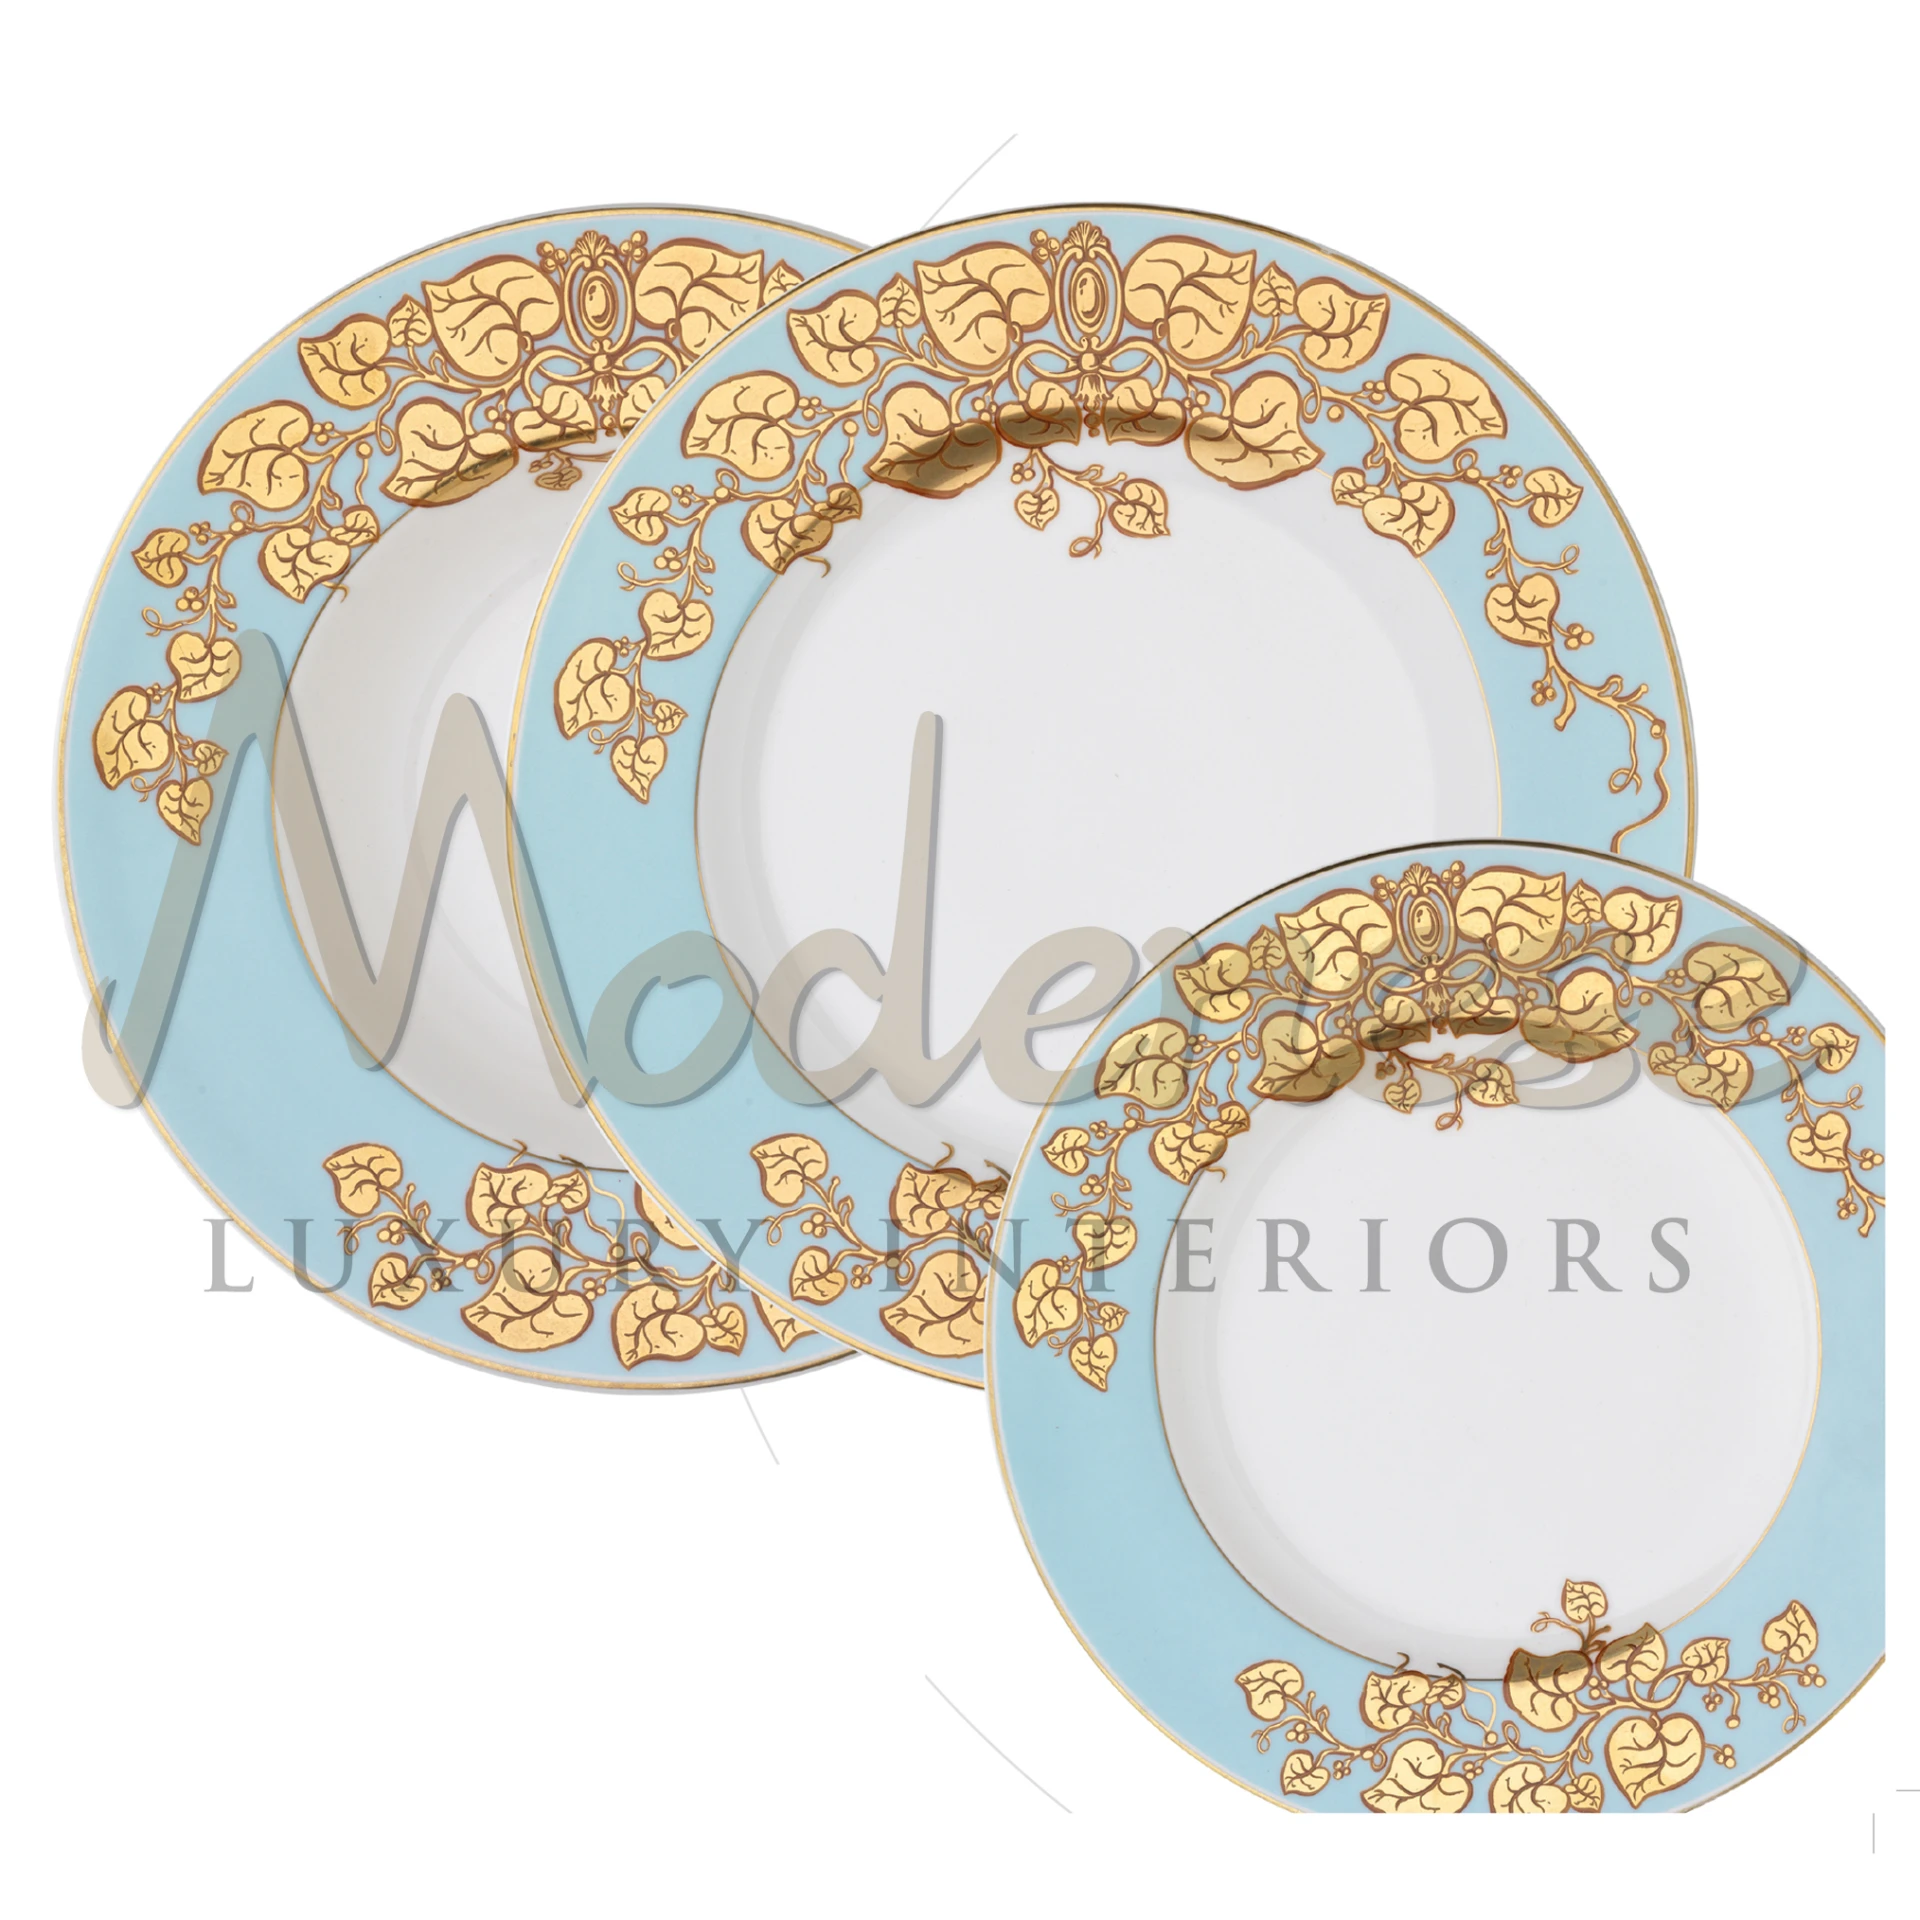 Three decorative plates with Turqouise borders and sophisticated golden designs